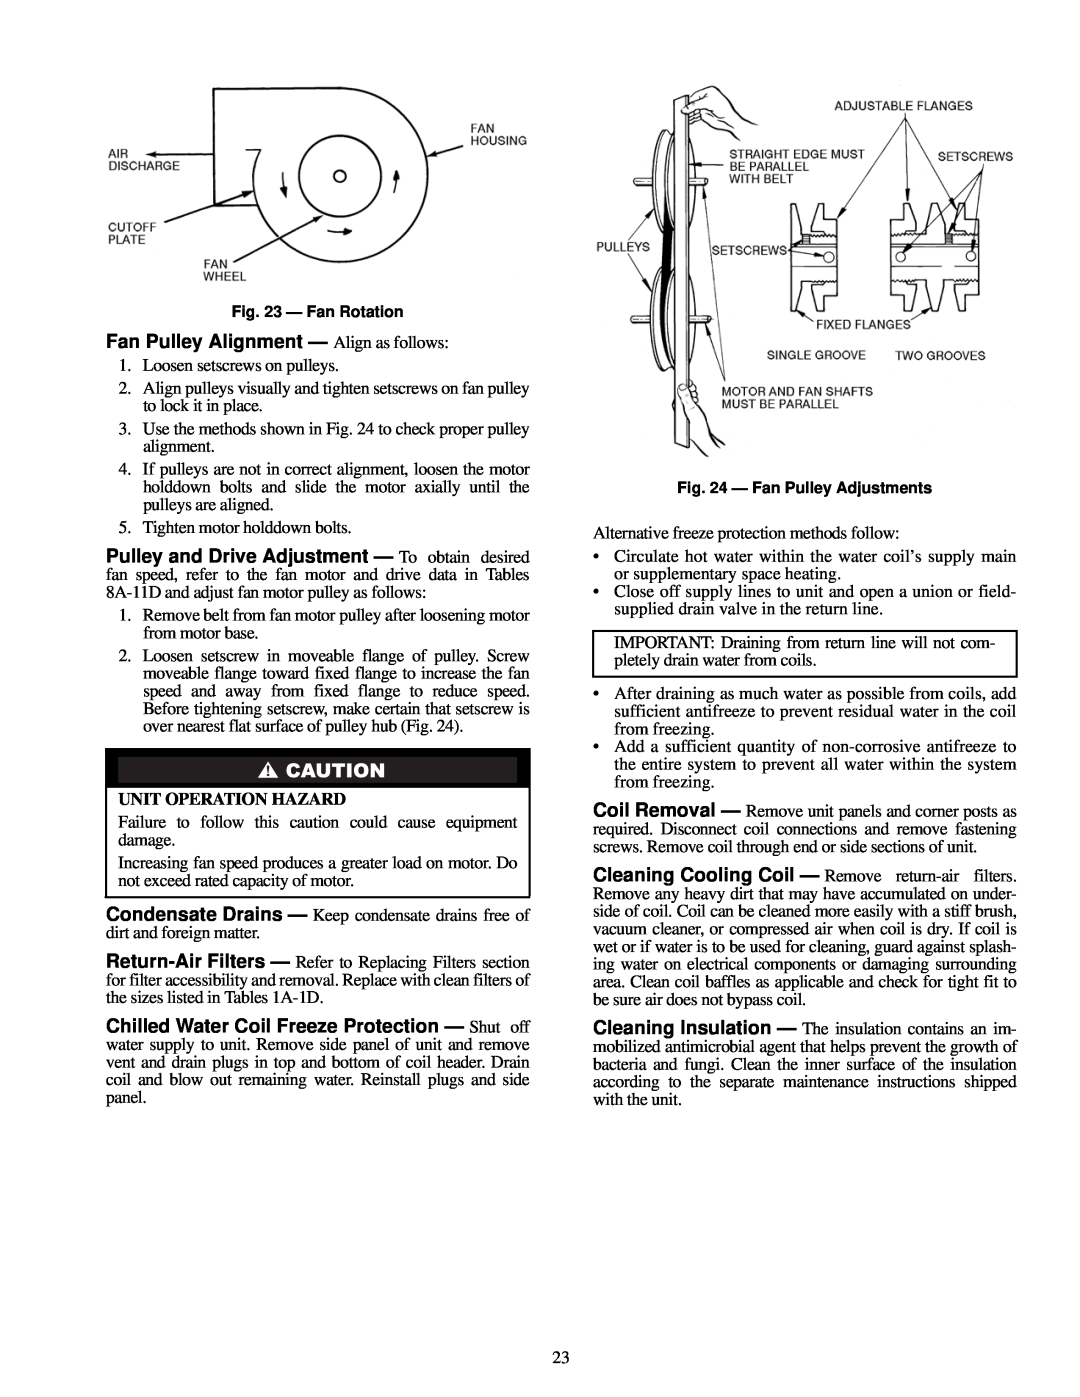 Carrier R-410A manual Fan Pulley Alignment - Align as follows, Unit Operation Hazard 